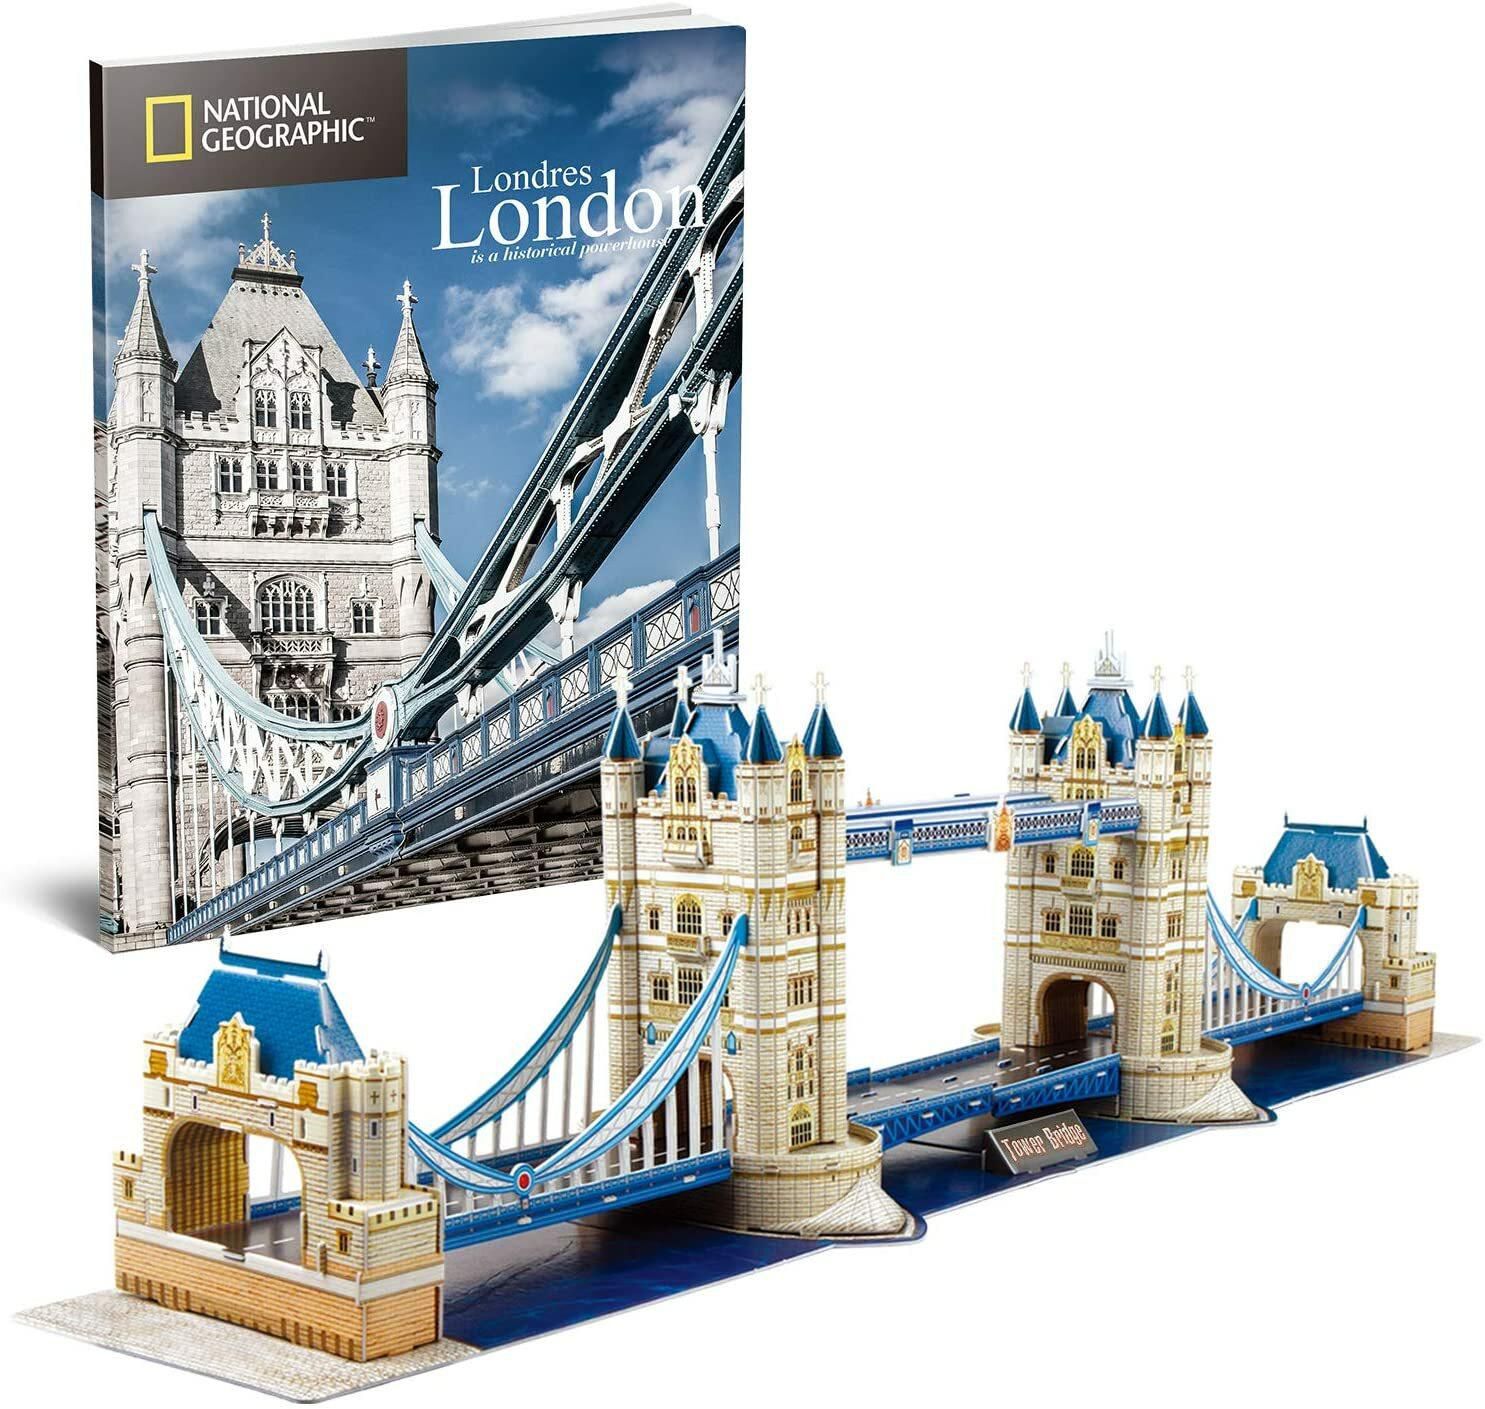 Cubicfun-National Geographic London 3D Model Kits Puzzle Toy With Booklet,Tower Bridge Ds0978H